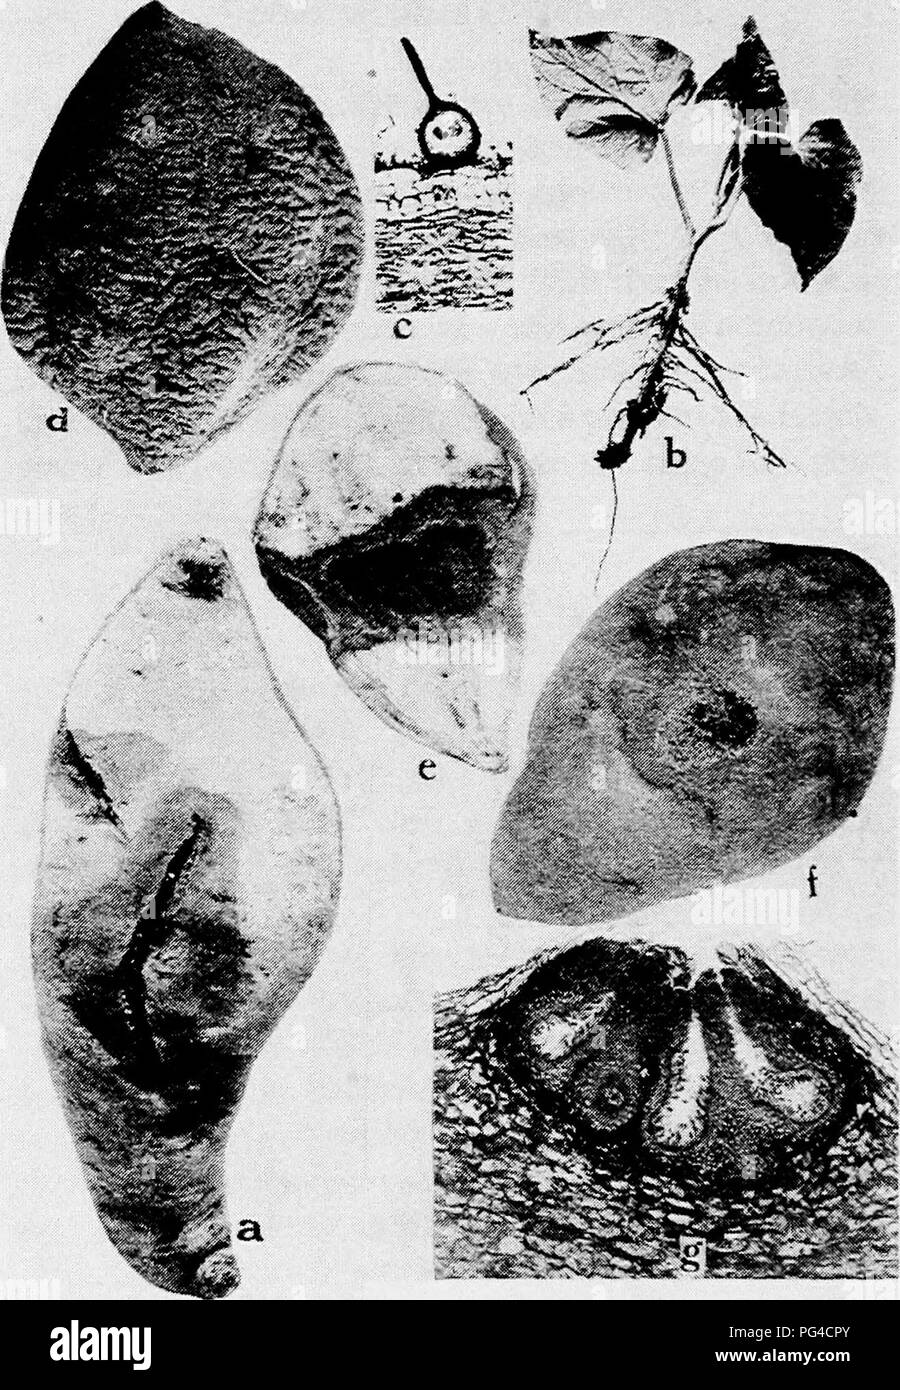 . Diseases of truck crops and their control . Vegetables. Fig. 26. Sweet Potato Diseases. a. Black rot at place of a bruise, b. black shank, c. showing a pycnidium of the black rot fungus, d.- dry rot, e. cross section through /, to show the effect of the disease on the root, /. Java black rot surface view, showing strings of spores oozing out from the center of spot, g. cross section through diseased sweet potato root to show pycnidia of the fungus Diplodia tubericola.. Please note that these images are extracted from scanned page images that may have been digitally enhanced for readability - Stock Photo